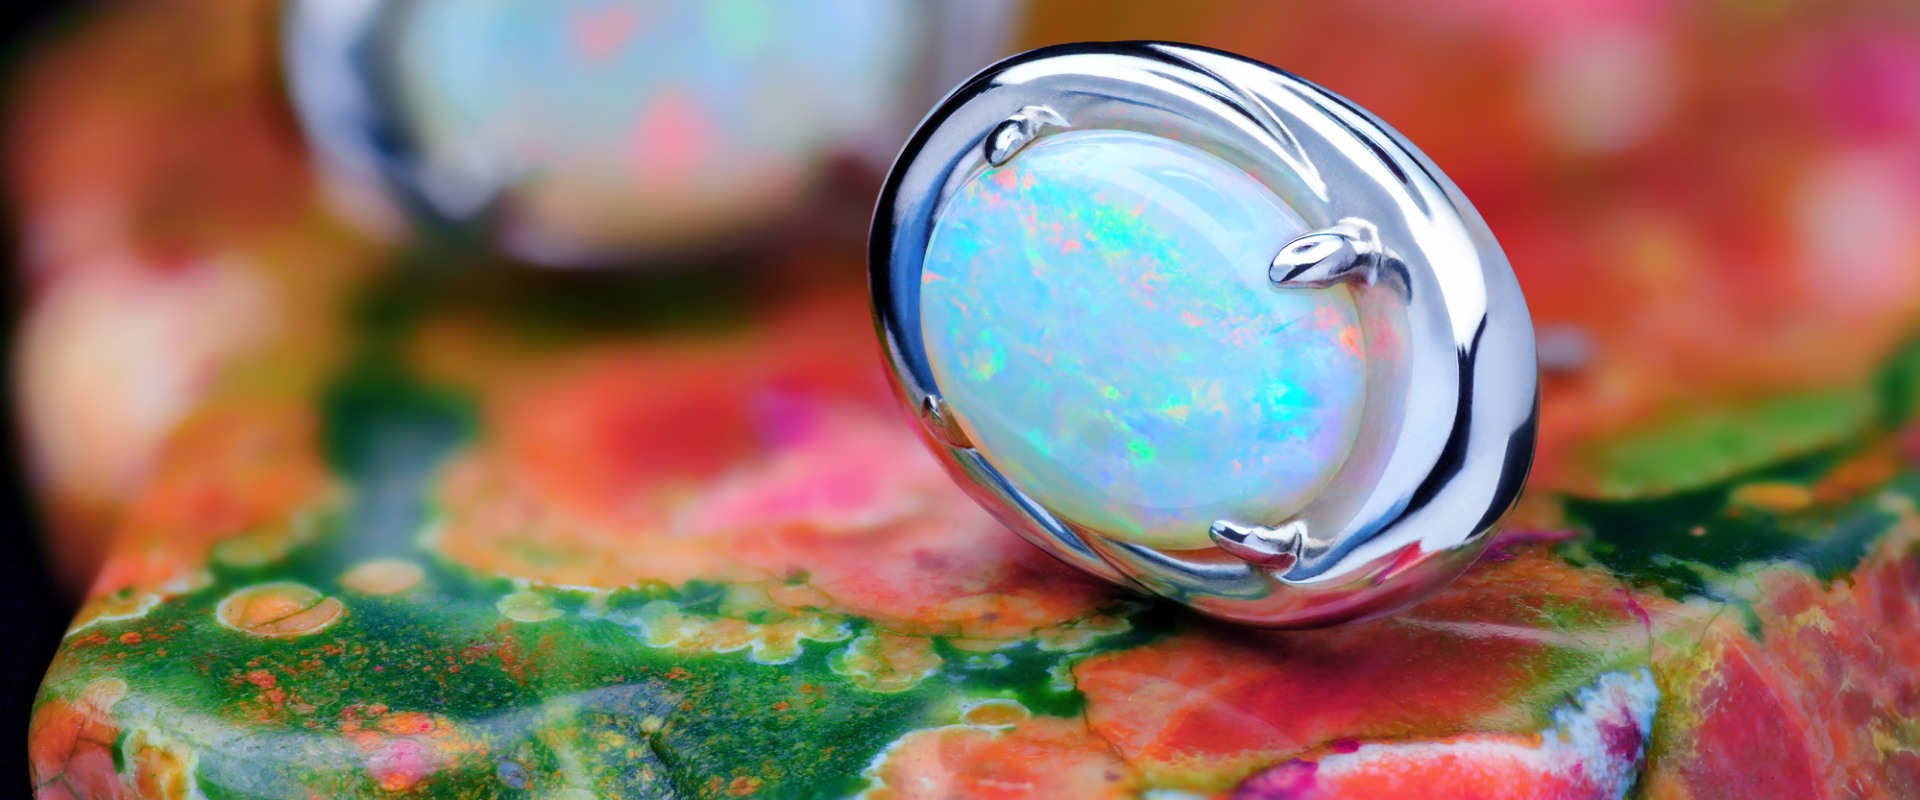 What is the meaning of an opal?